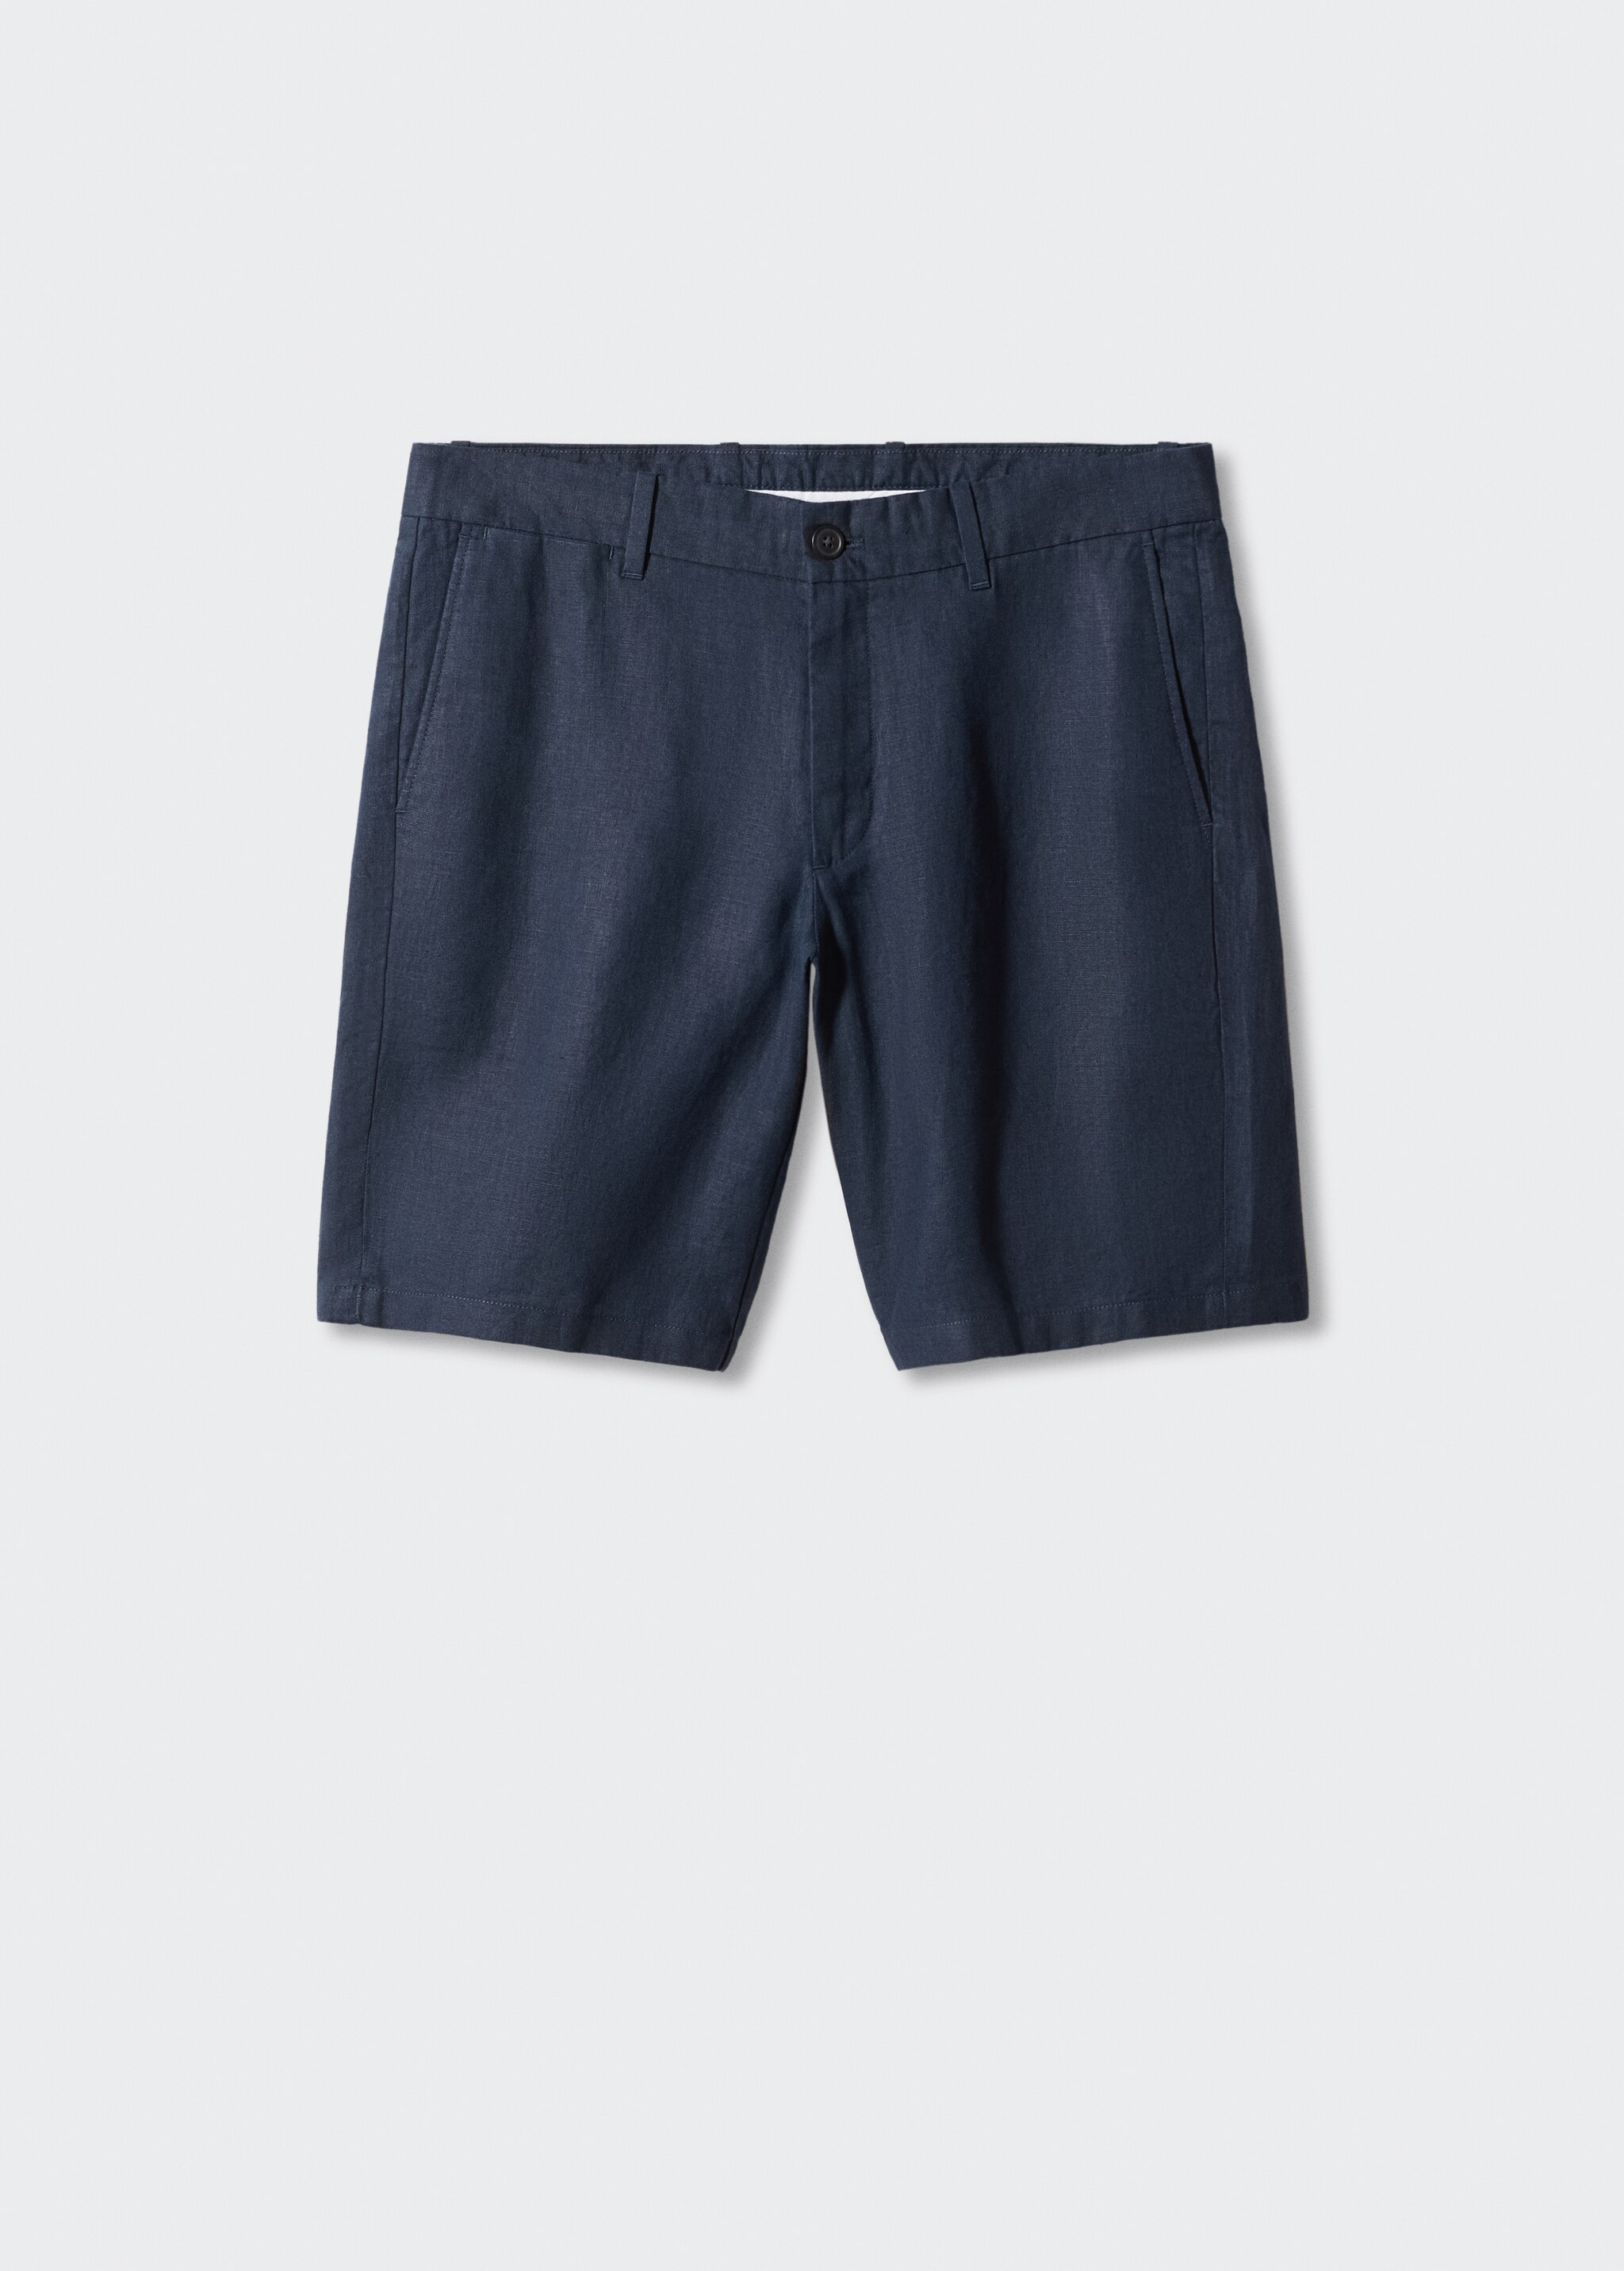 100% linen shorts - Article without model